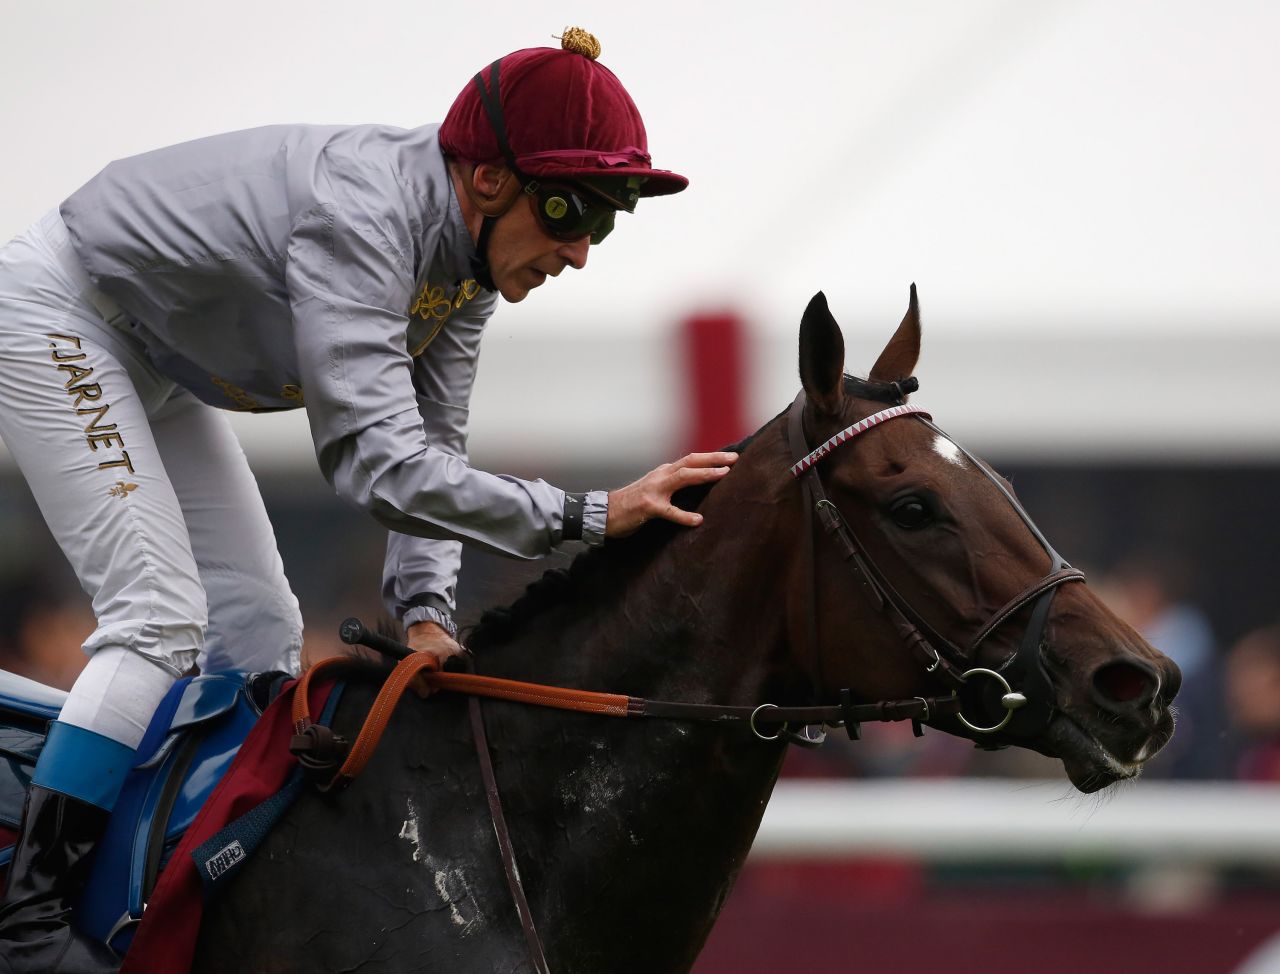 Treve and jockey Thierry Jarnet return after only finishing fourth at Longchamp while bidding for a third straight win.